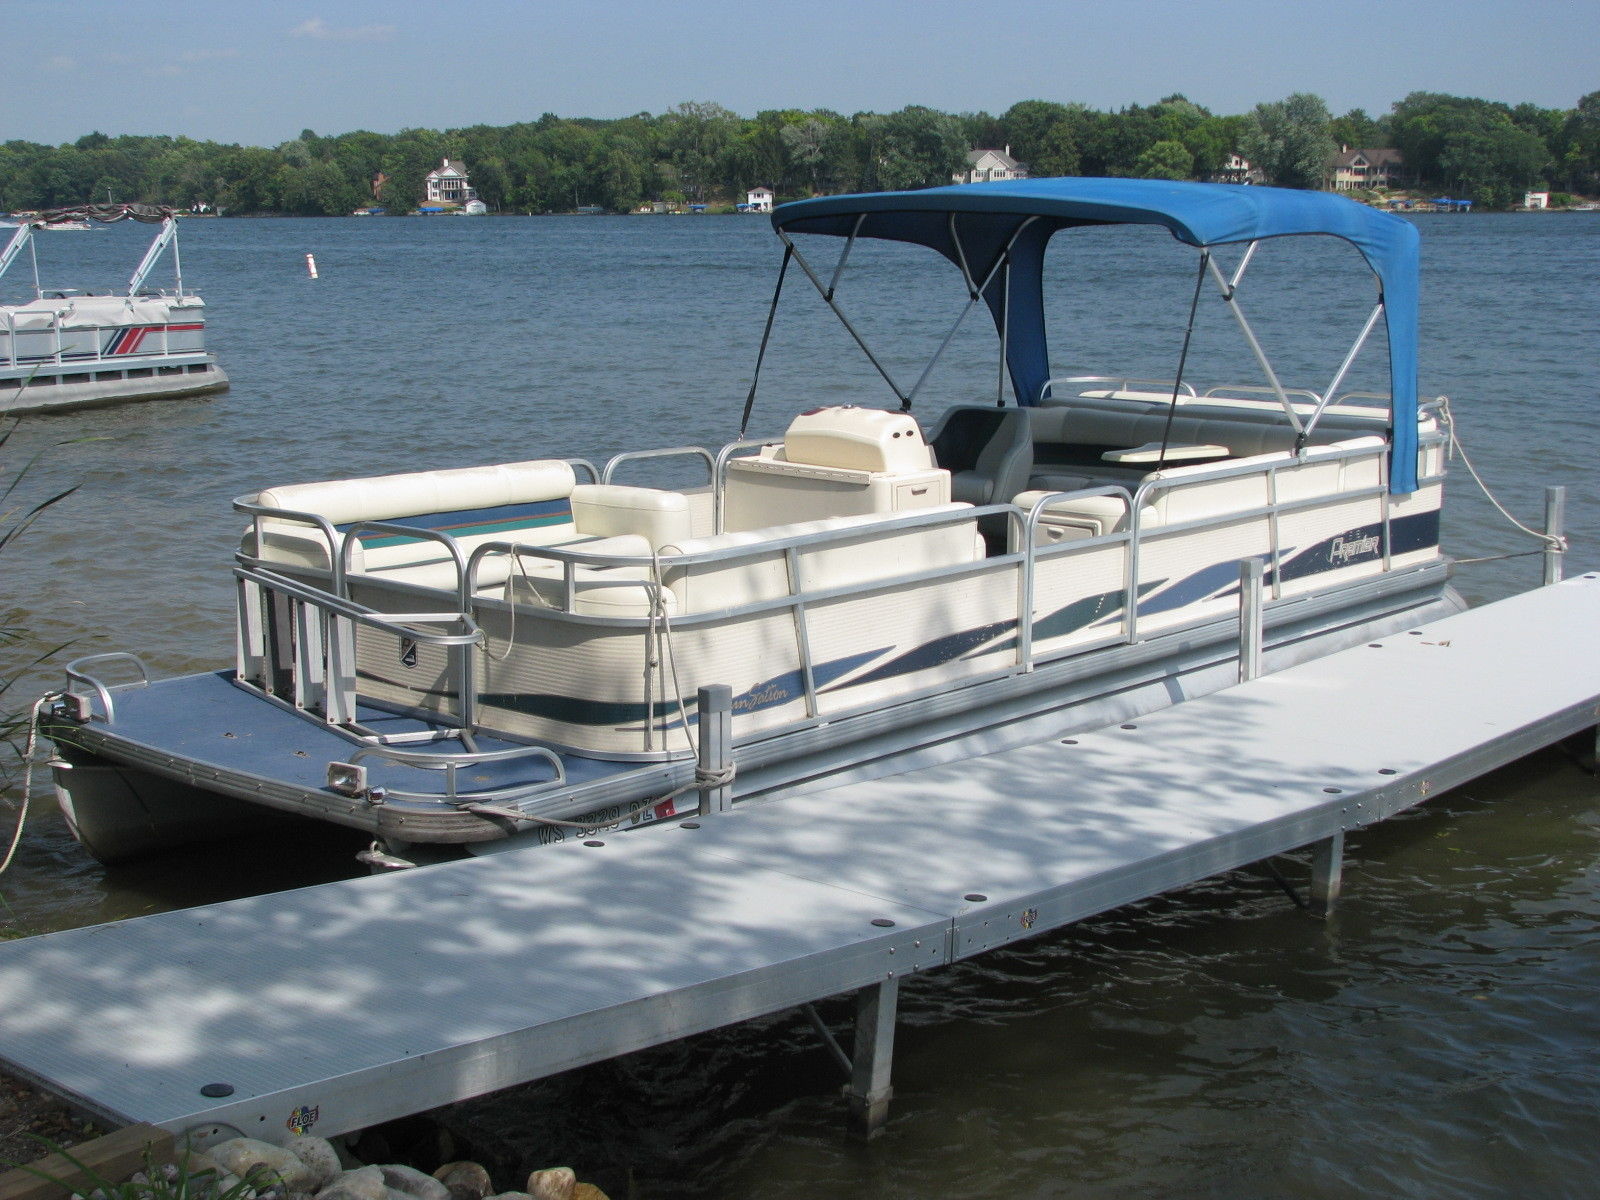 Premier SunSation 1996 for sale for $5,750 - Boats-from ...